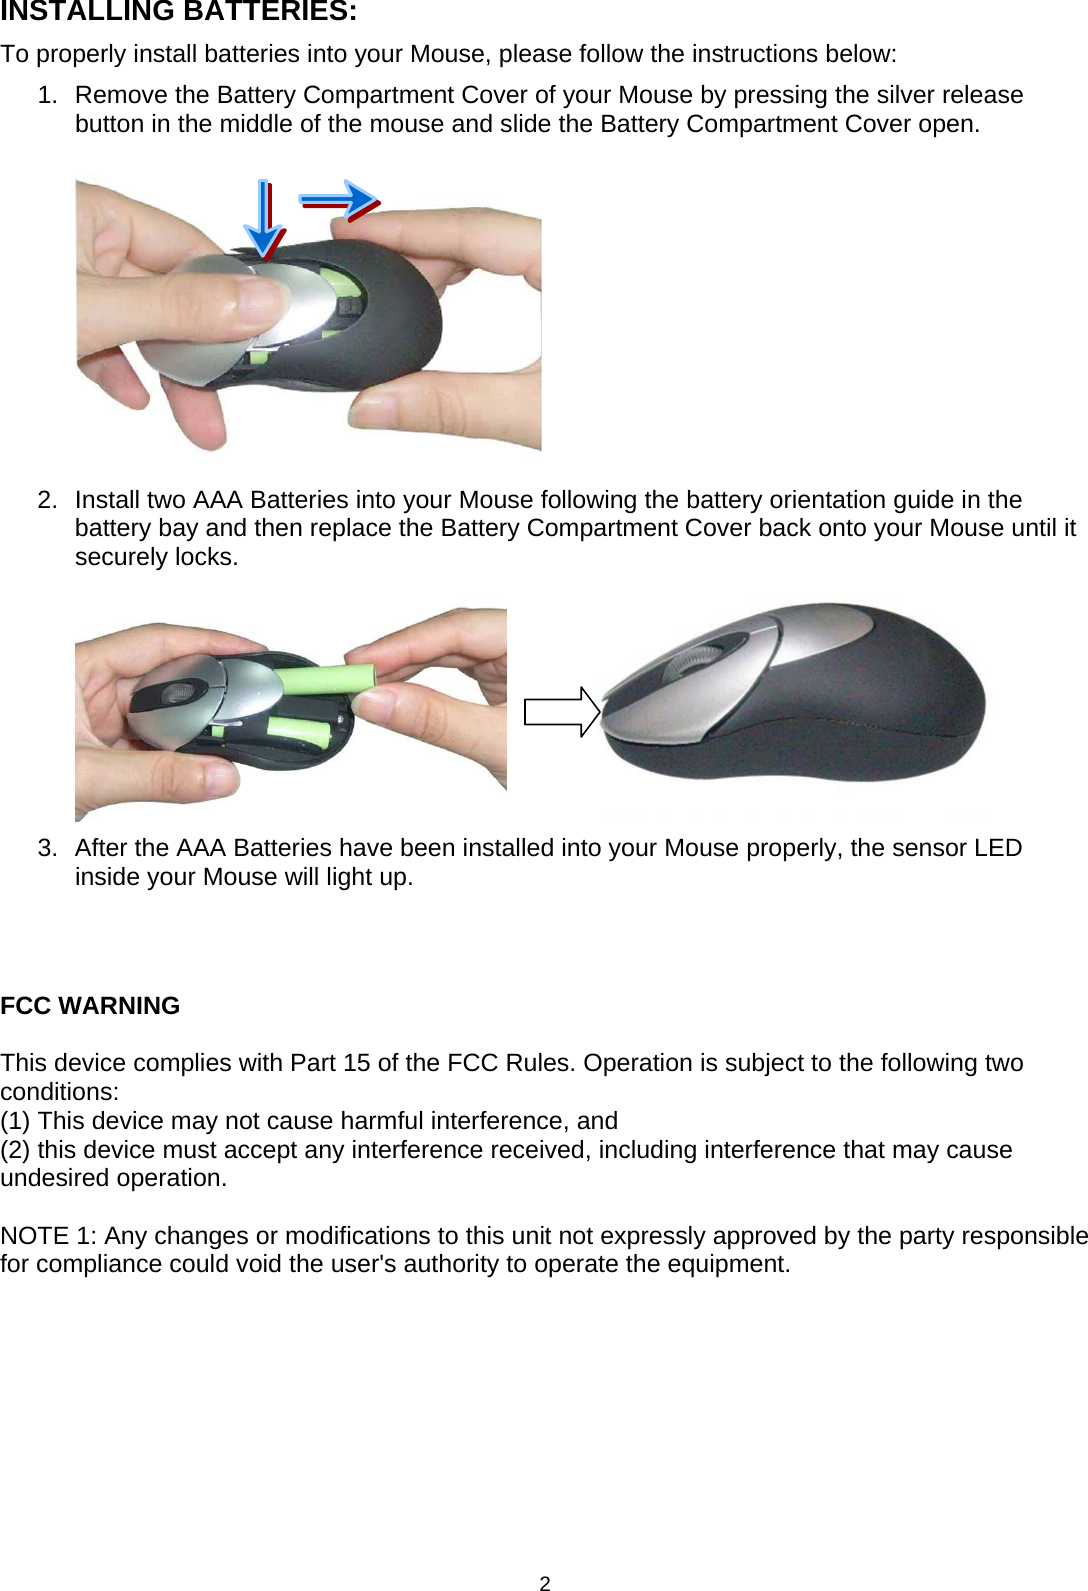 2 INSTALLING BATTERIES: To properly install batteries into your Mouse, please follow the instructions below: 1.  Remove the Battery Compartment Cover of your Mouse by pressing the silver release button in the middle of the mouse and slide the Battery Compartment Cover open.  2.  Install two AAA Batteries into your Mouse following the battery orientation guide in the battery bay and then replace the Battery Compartment Cover back onto your Mouse until it securely locks.              3.  After the AAA Batteries have been installed into your Mouse properly, the sensor LED inside your Mouse will light up.    FCC WARNING  This device complies with Part 15 of the FCC Rules. Operation is subject to the following two conditions: (1) This device may not cause harmful interference, and (2) this device must accept any interference received, including interference that may cause undesired operation.  NOTE 1: Any changes or modifications to this unit not expressly approved by the party responsible for compliance could void the user&apos;s authority to operate the equipment.     